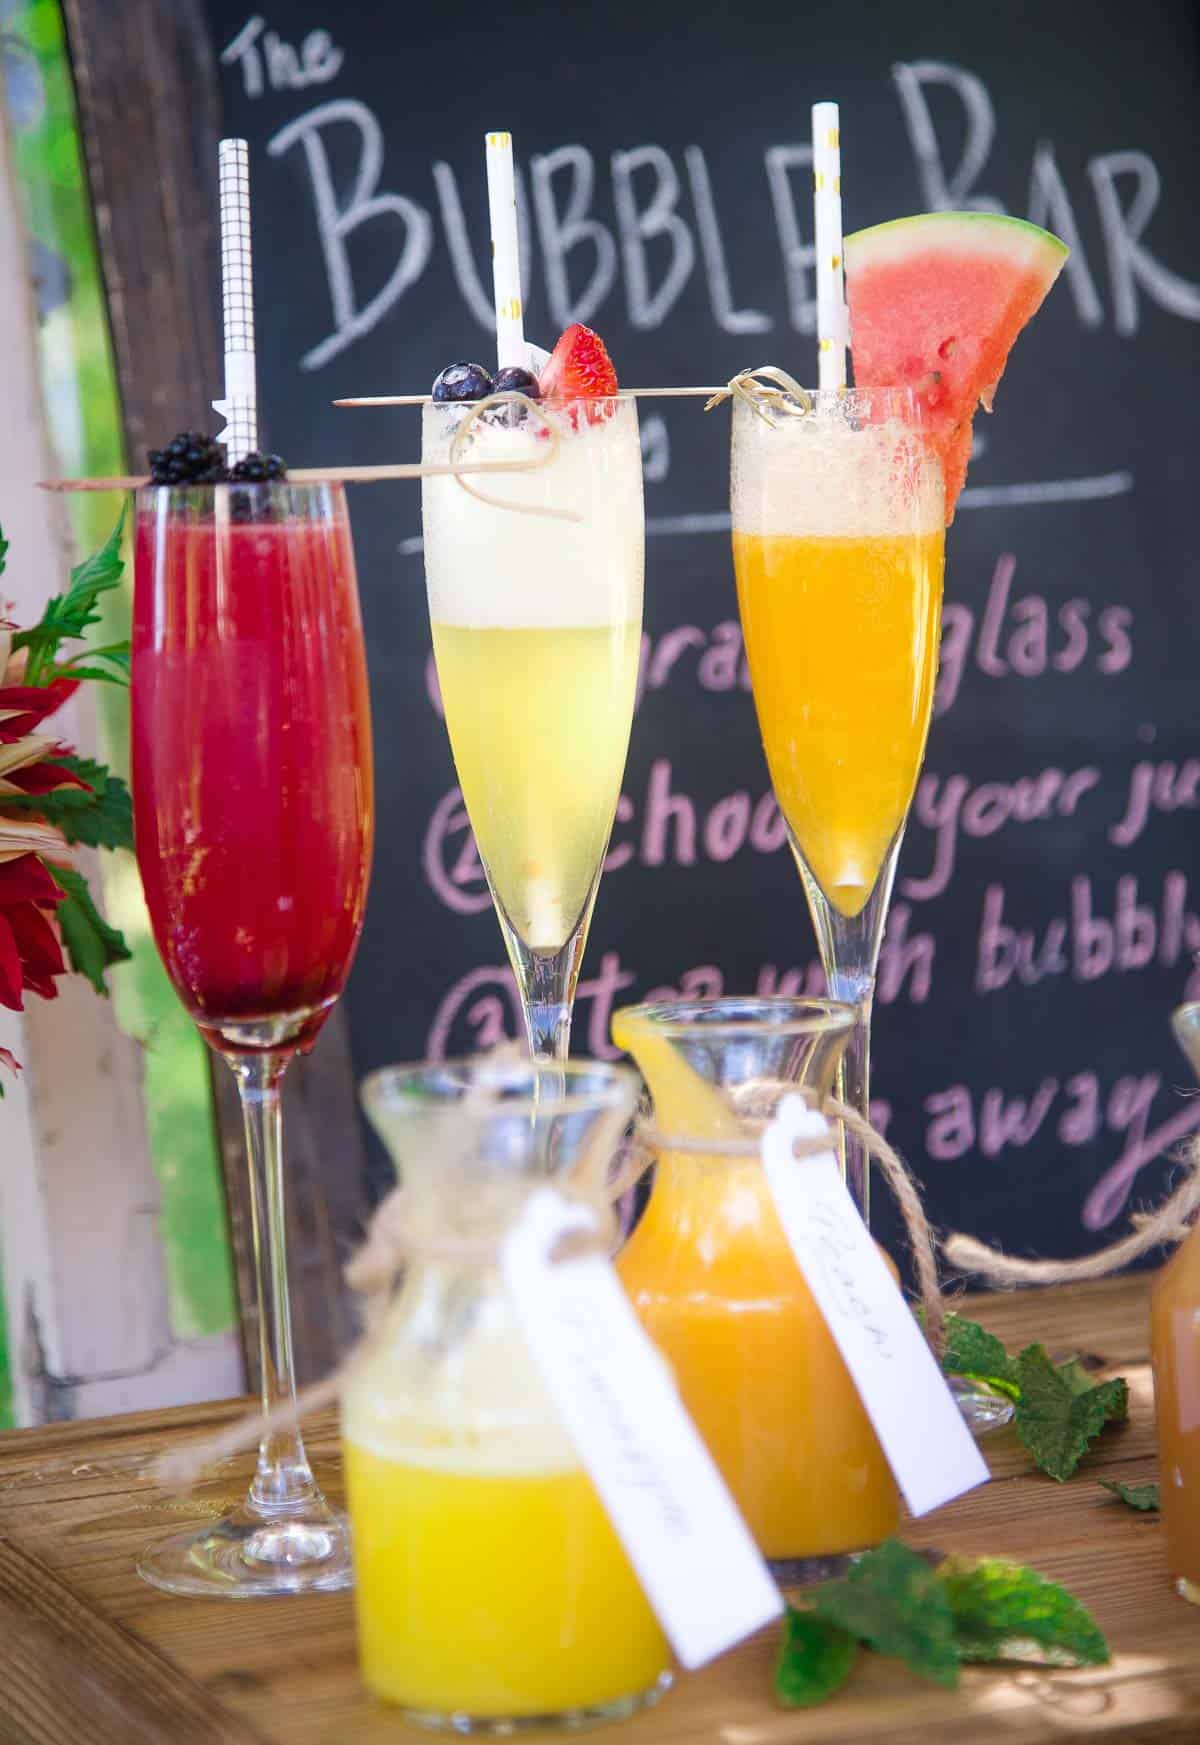 https://www.vindulge.com/wp-content/uploads/2023/04/Different-Kinds-of-Mimosas-at-a-Mimosa-Bar.jpg